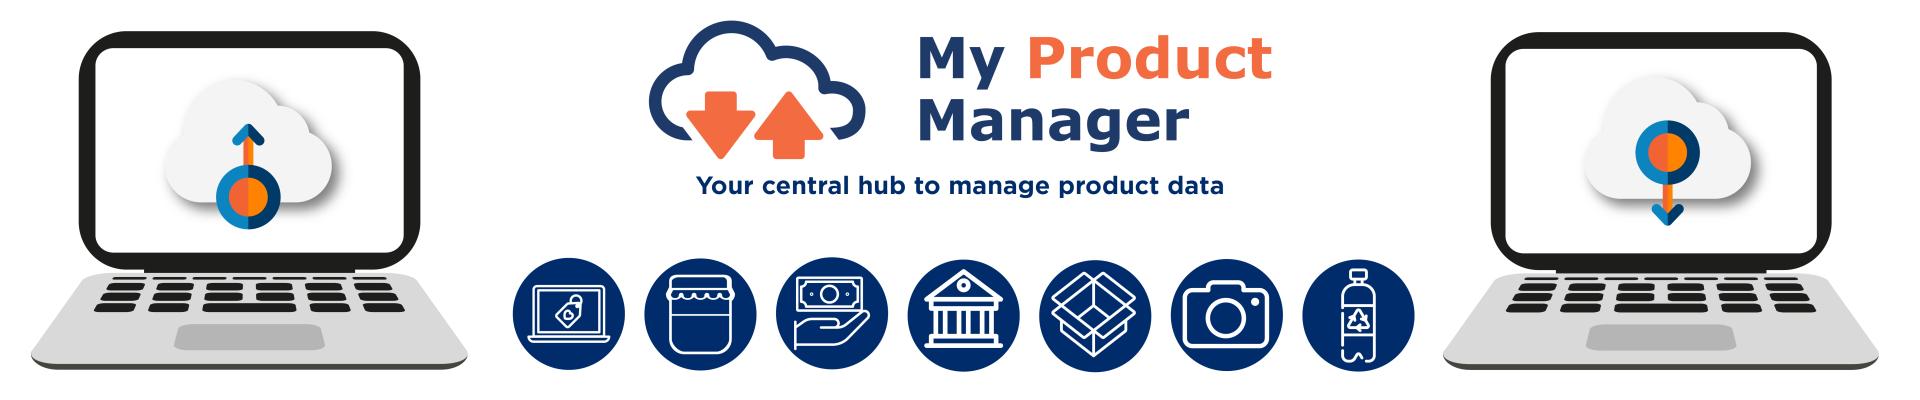 My Product Manager Share